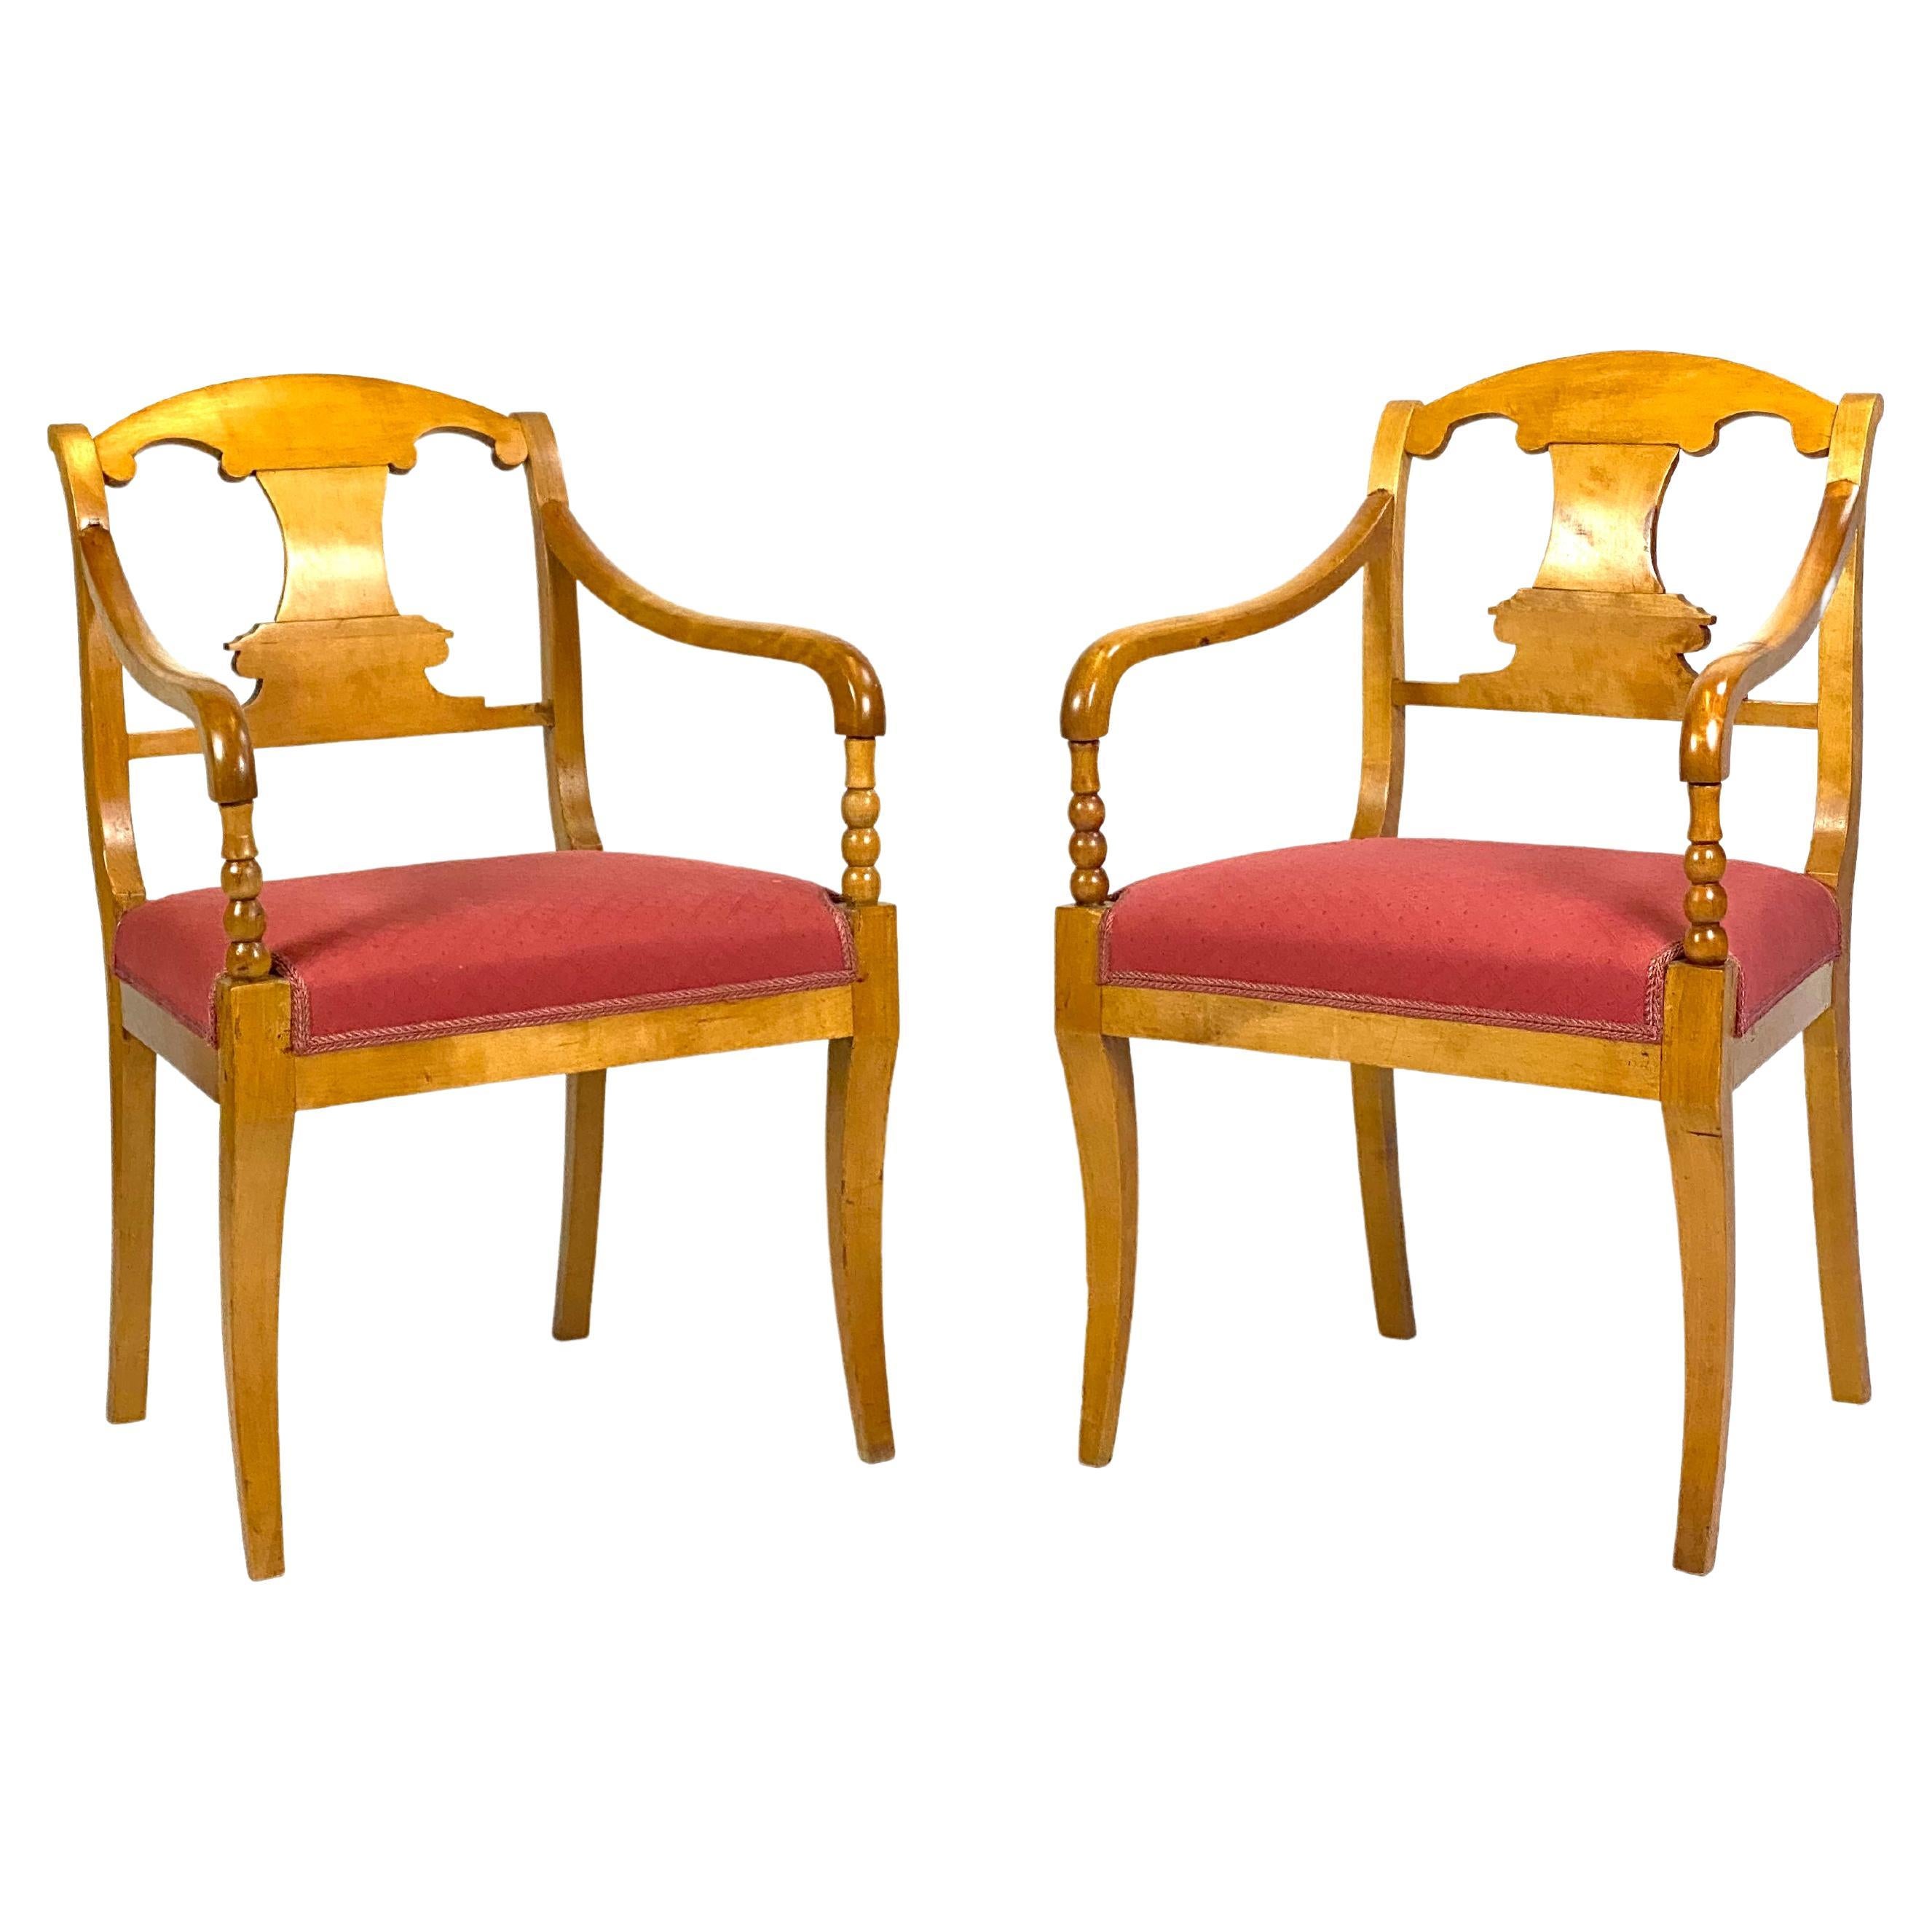 Pair of Late Empire Armchairs in Birch from the 1840s